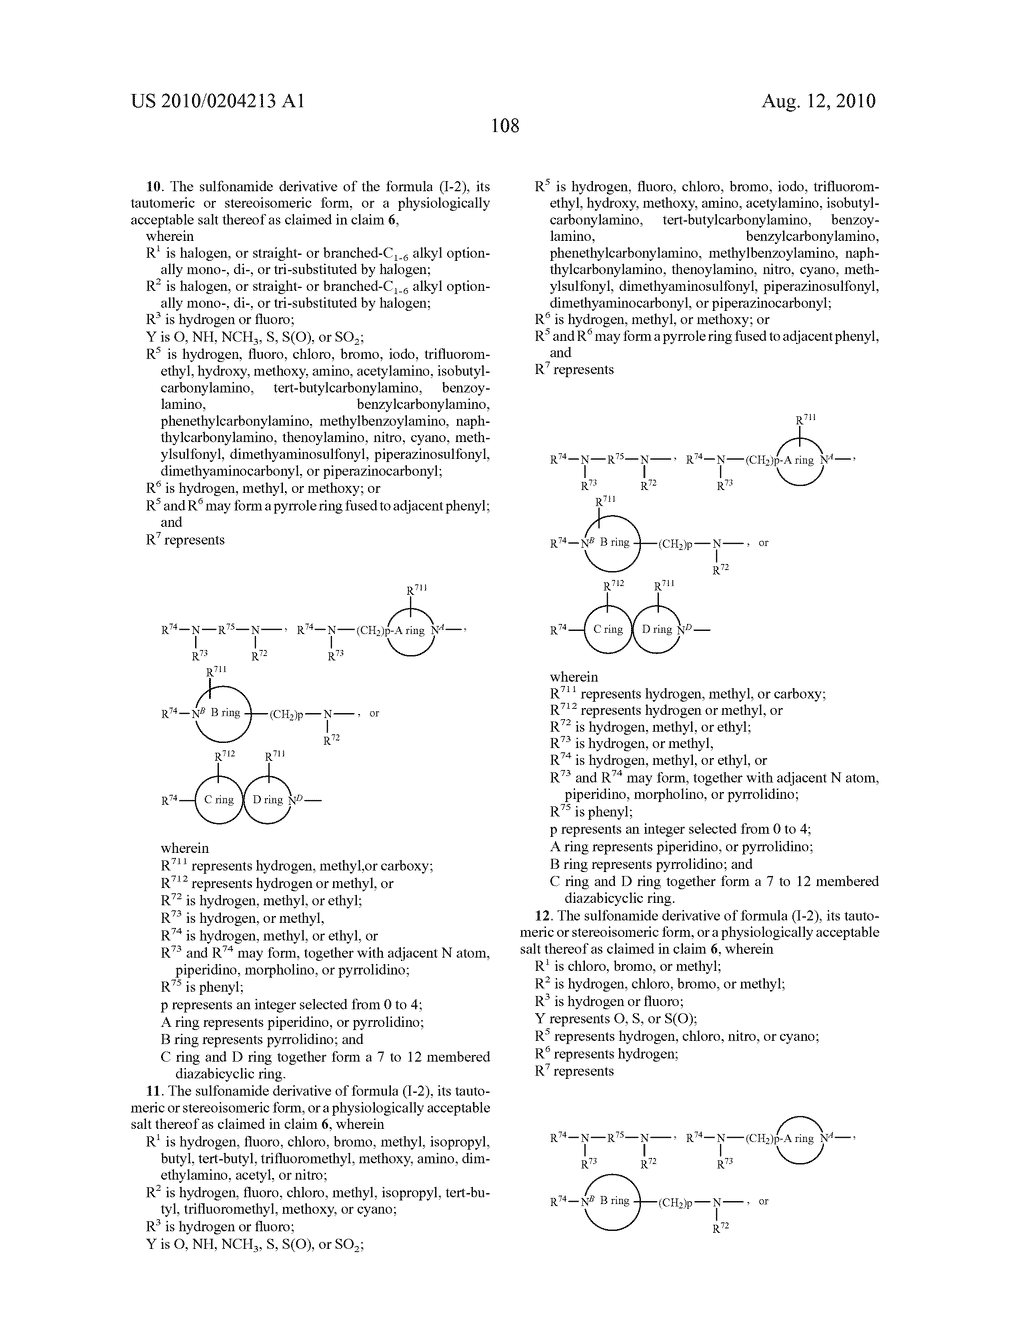 ARYLSULFONAMIDE DERIVATIVES FOR USE AS CCR3 ANTAGONISTS IN THE TREATMENT OF INFLAMMATORY AND IMMUNOLOGICAL DISORDERS - diagram, schematic, and image 109